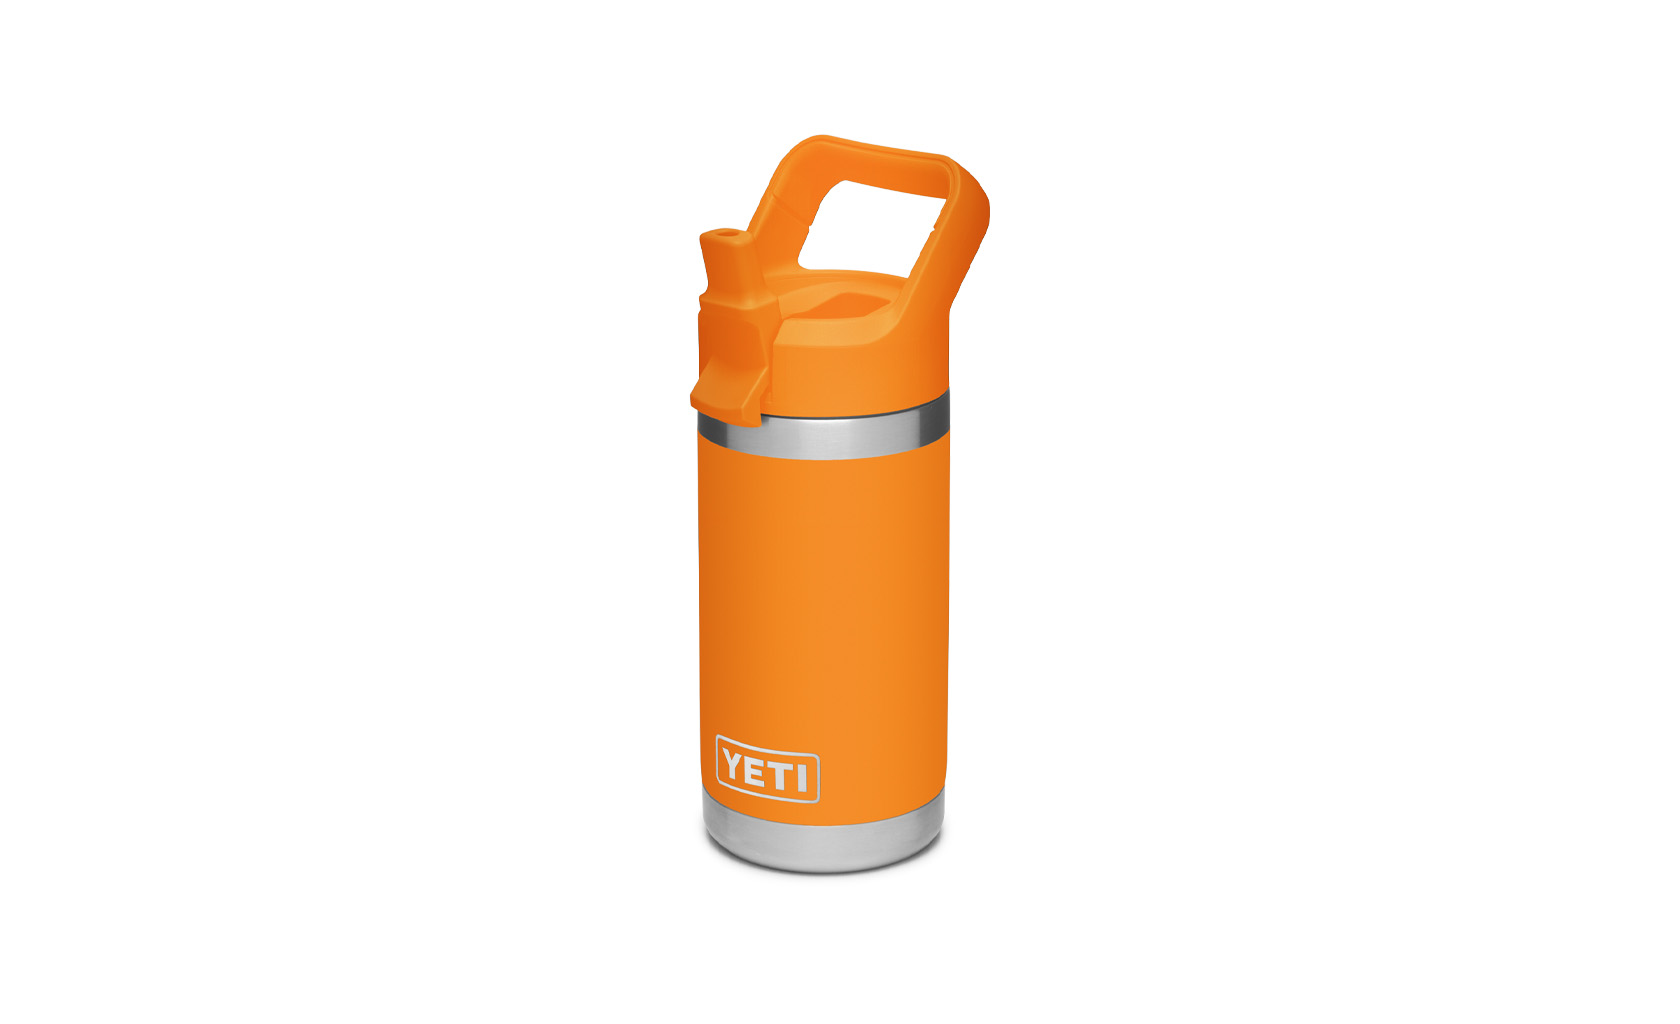 Thermos 2 L Stainless King Vacuum-Insulated Beverage Bottle at Tractor  Supply Co.